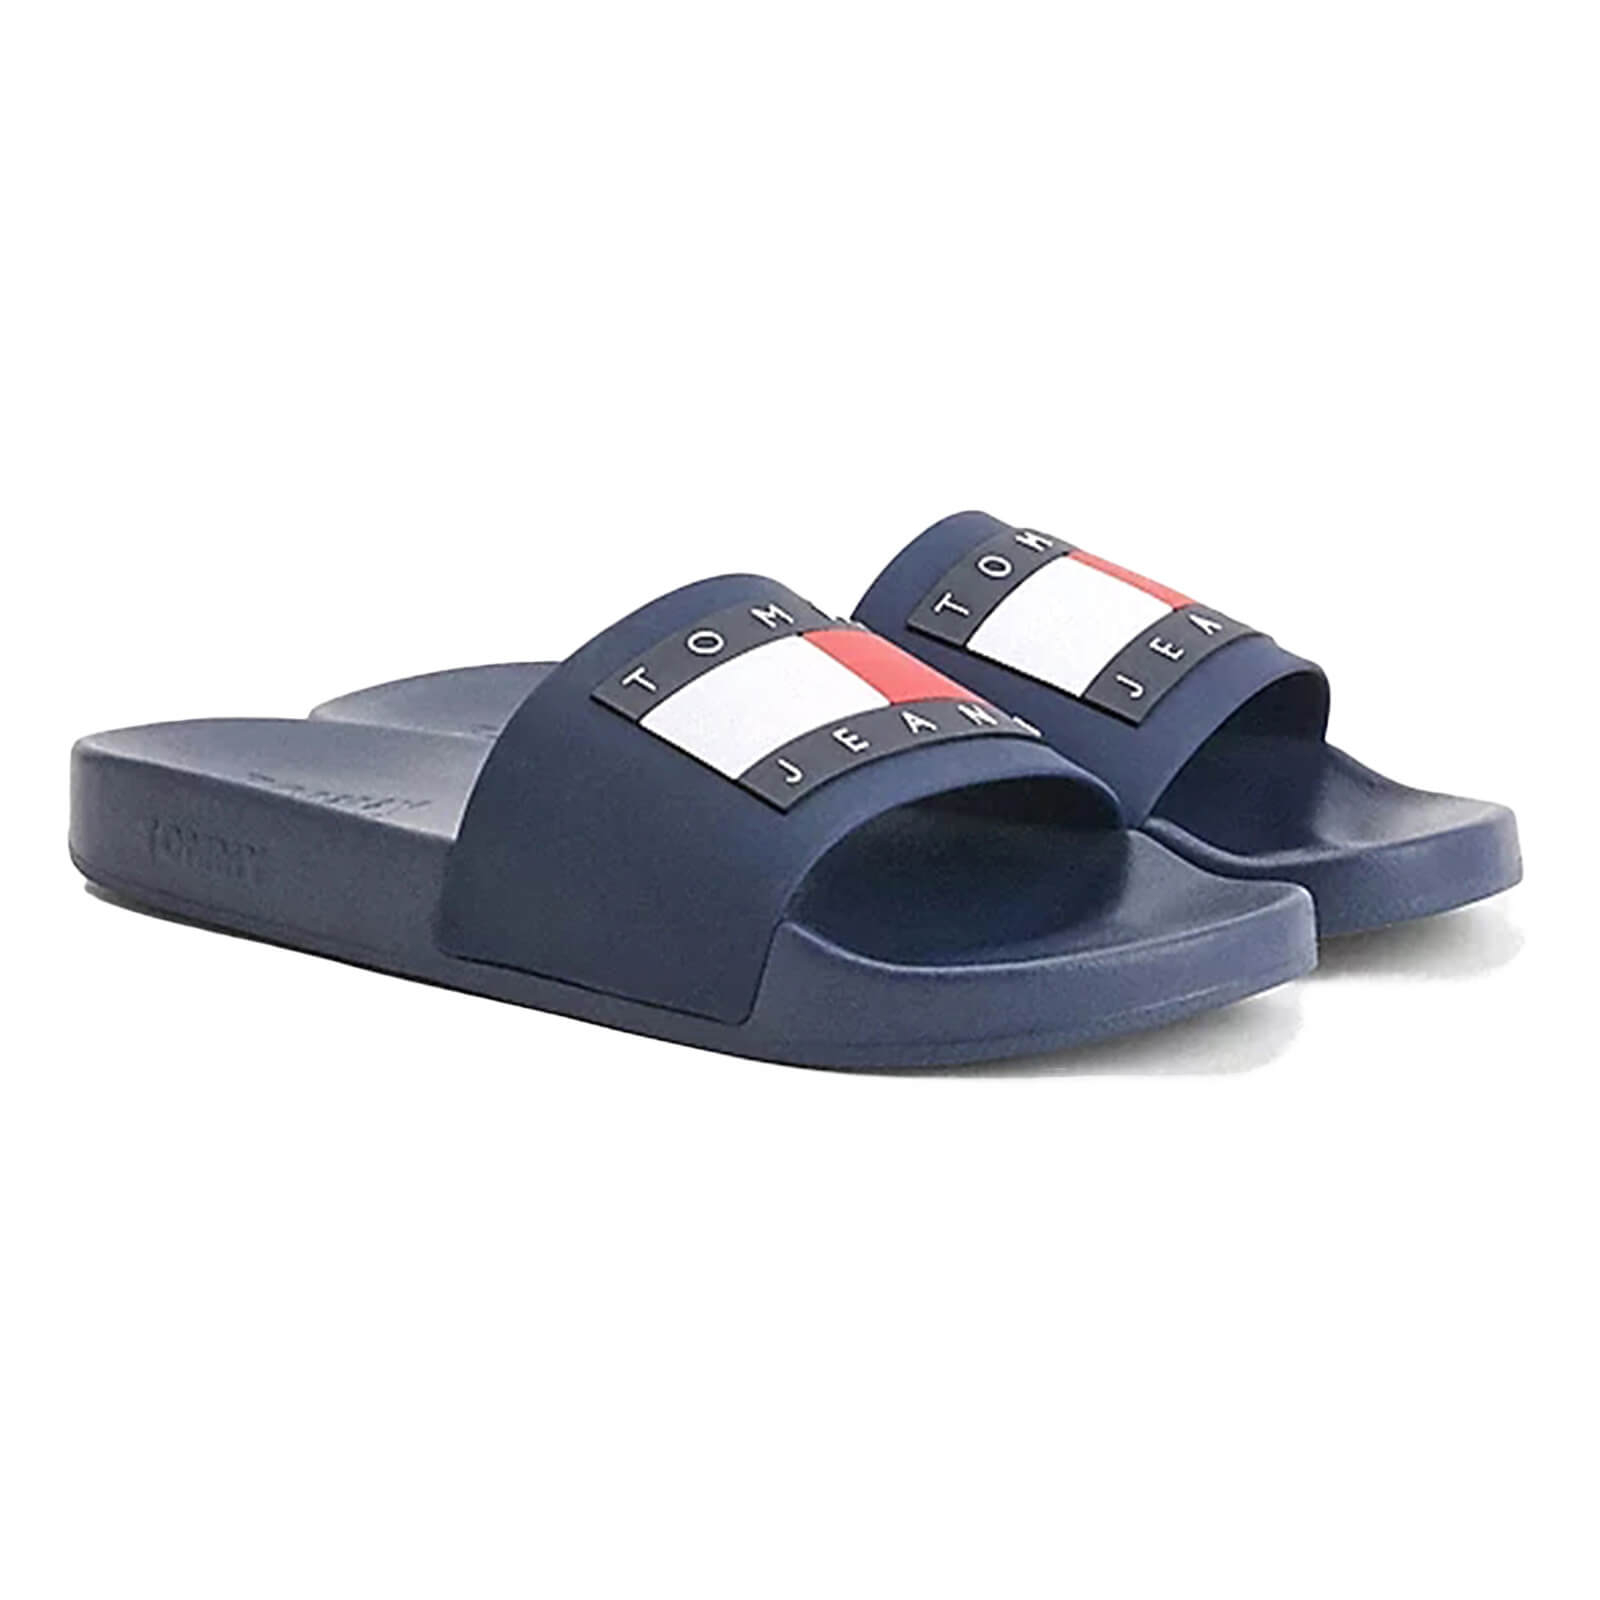 Girlfriend Applied the snow's Papuci Tommy Hilfiger Flag Pool Slide - EM01021-C87